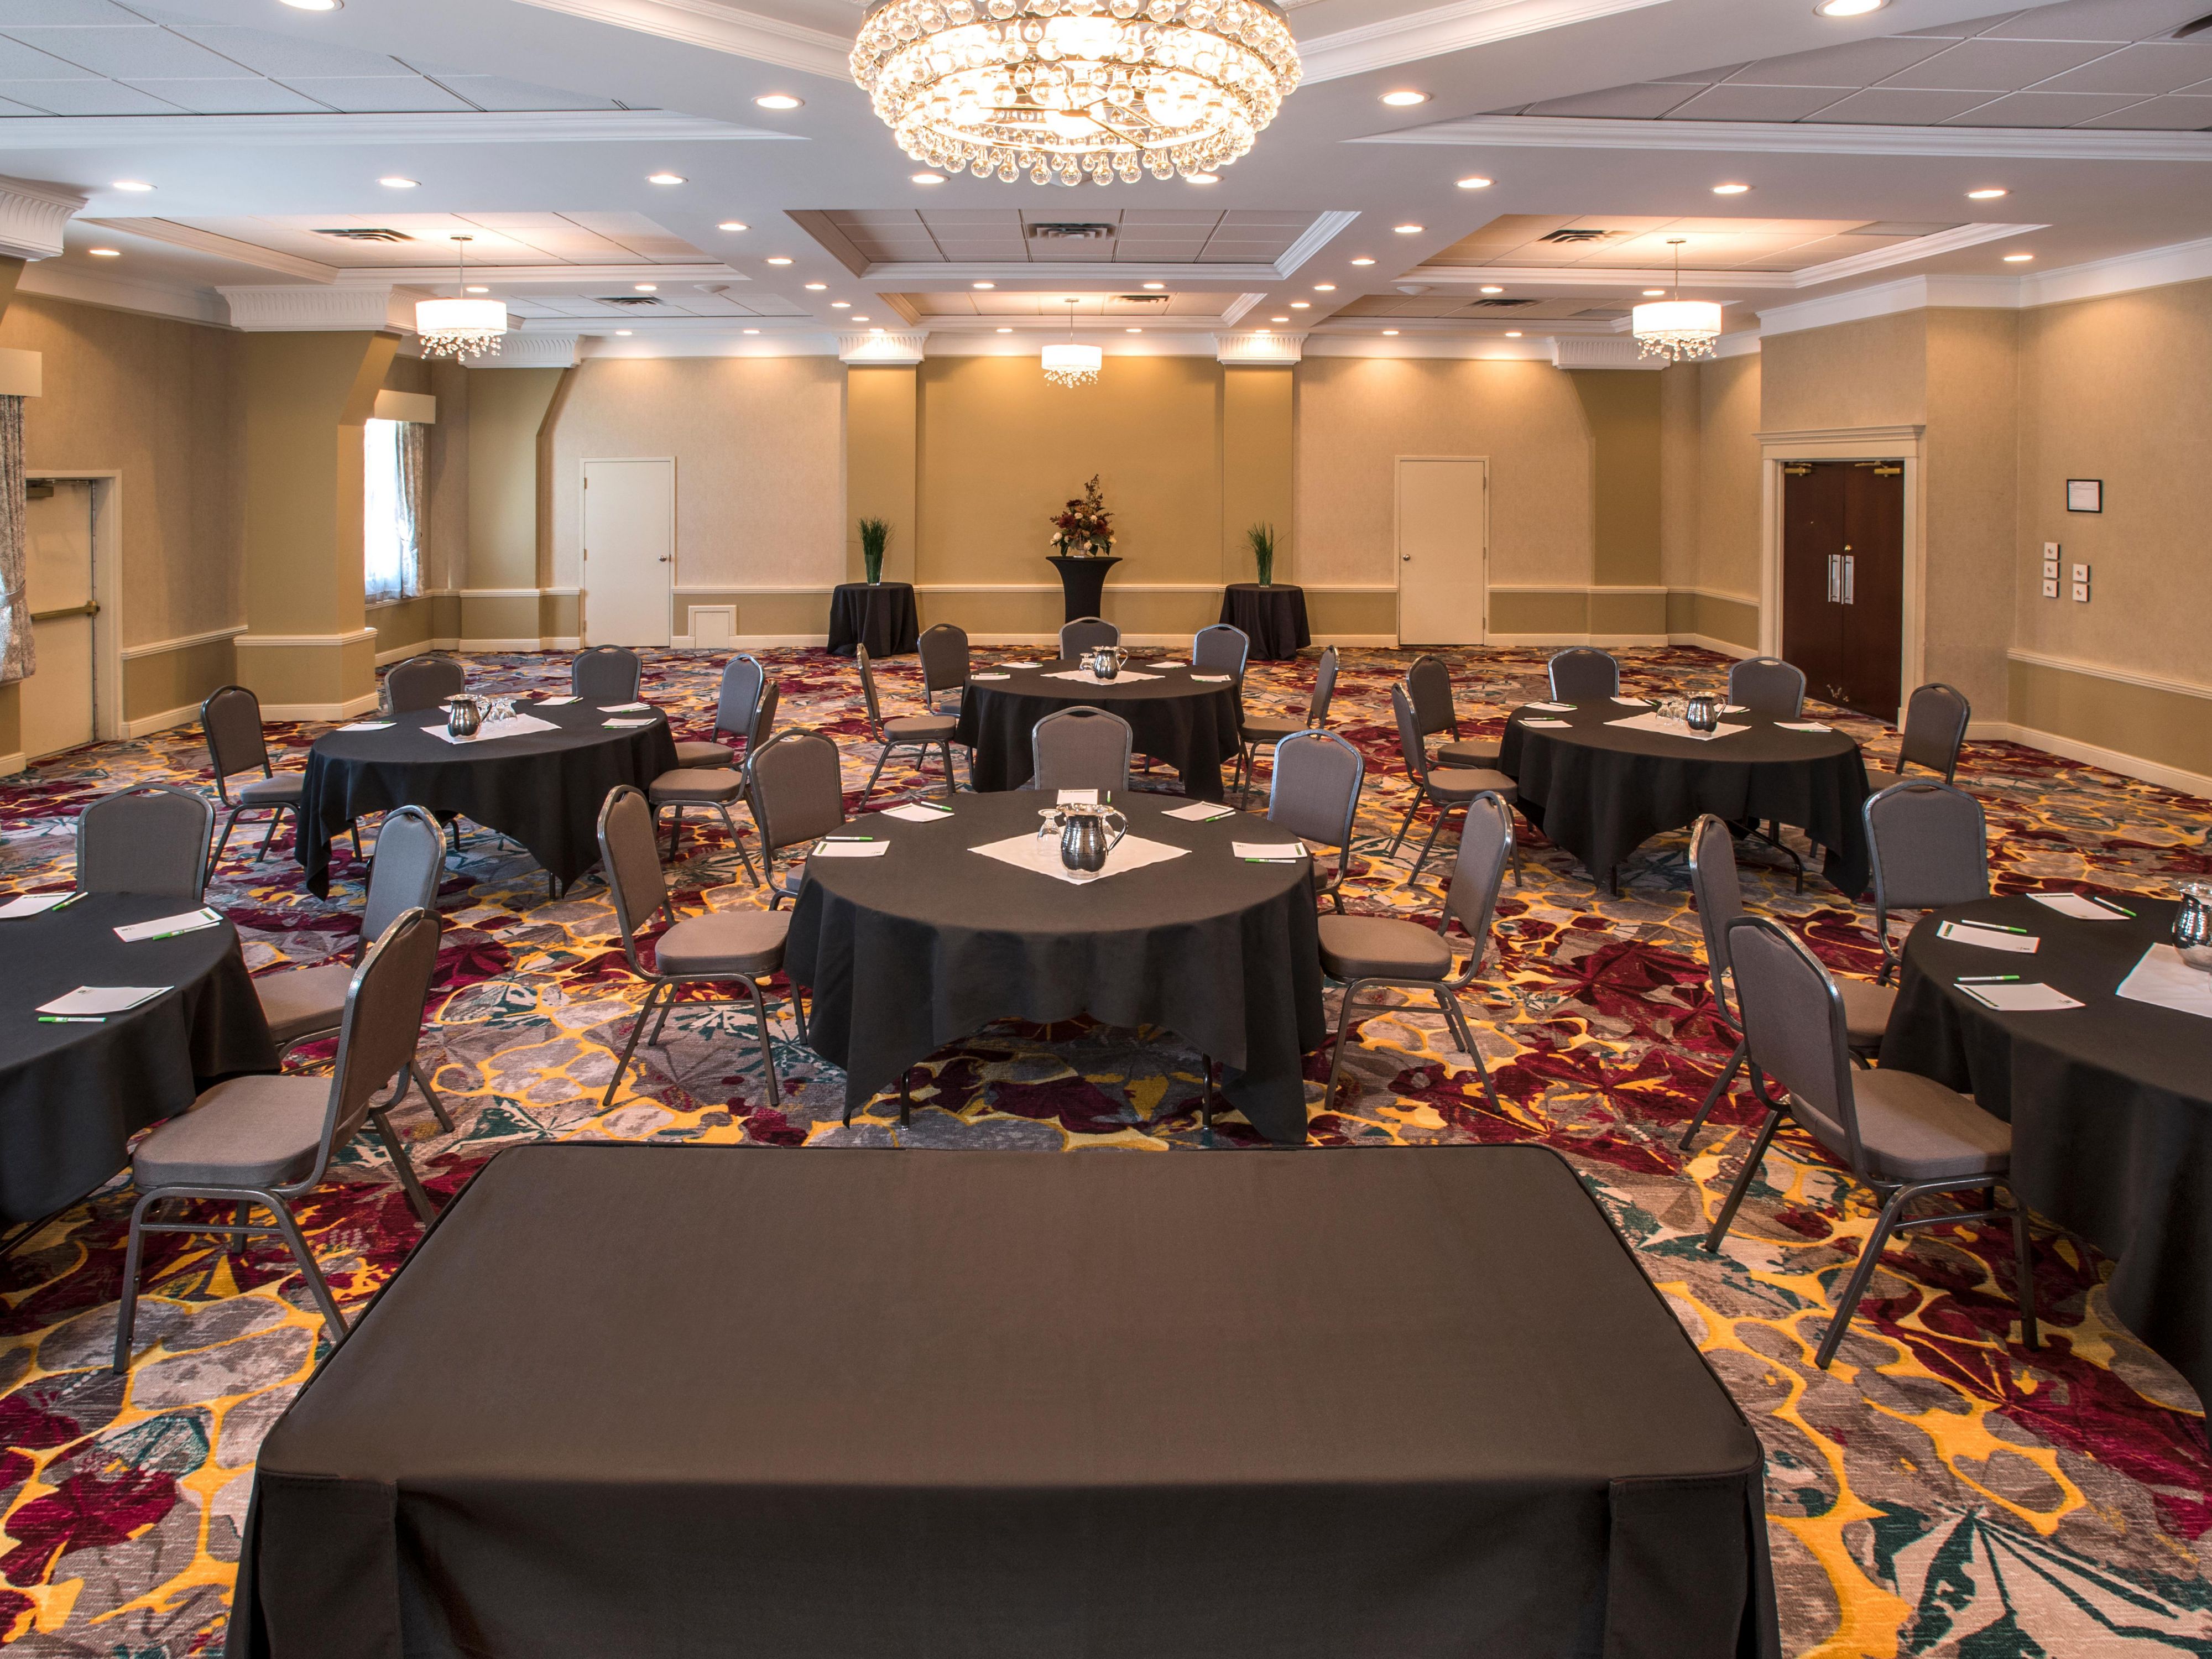 With over 6,000 sqft of flexible meeting space - book your corporate meeting or special event with us and save!  Ask us for more details.